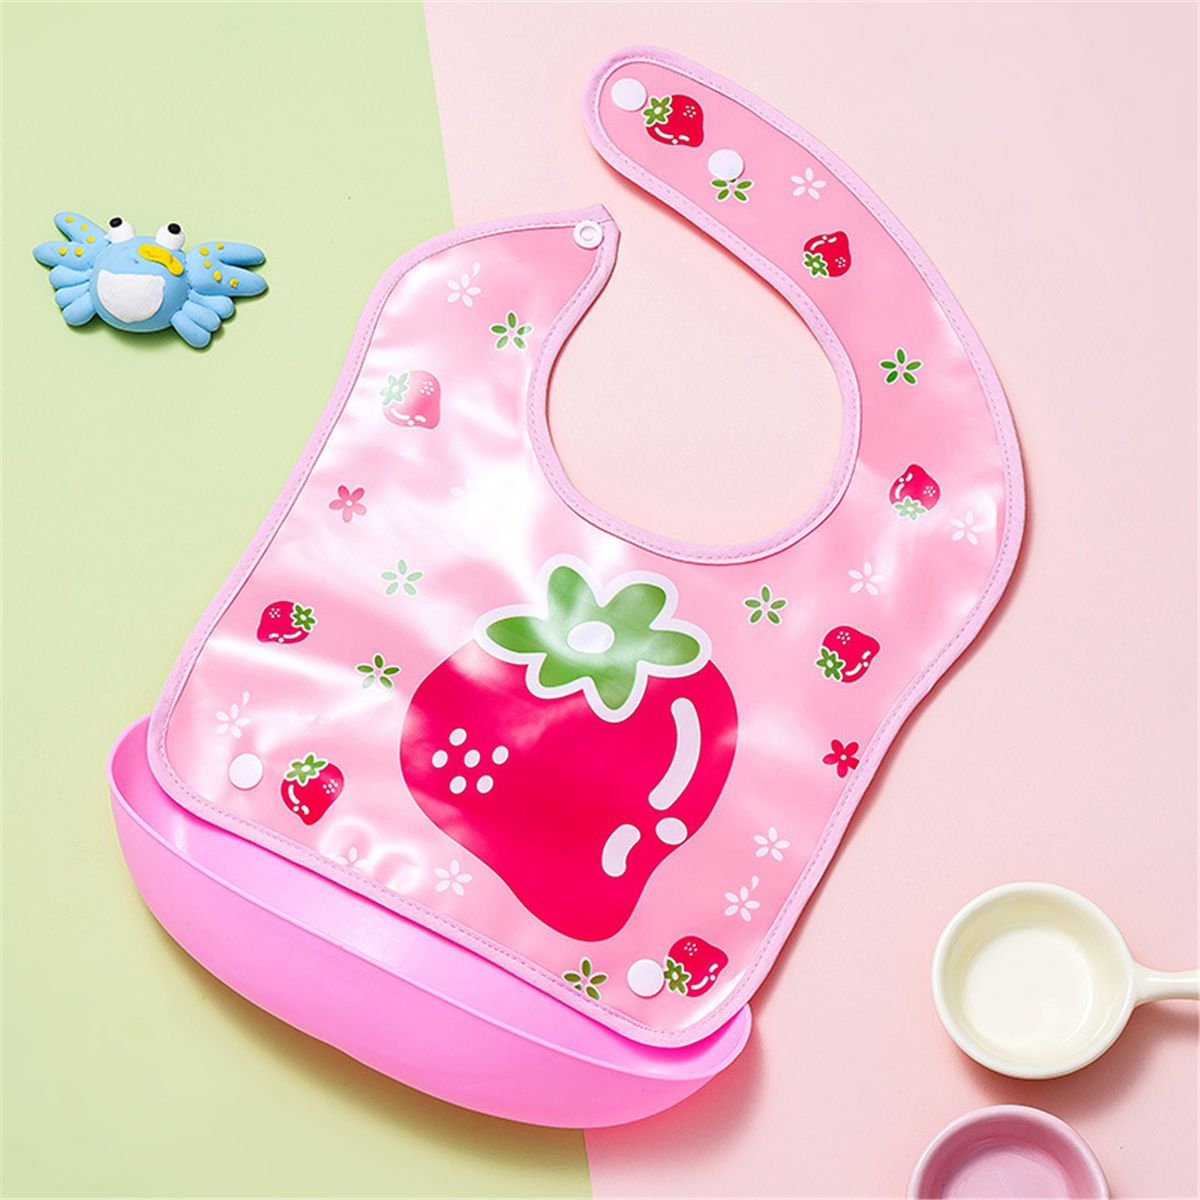 Adjustable Waterproof Bib For Infants And Toddlers